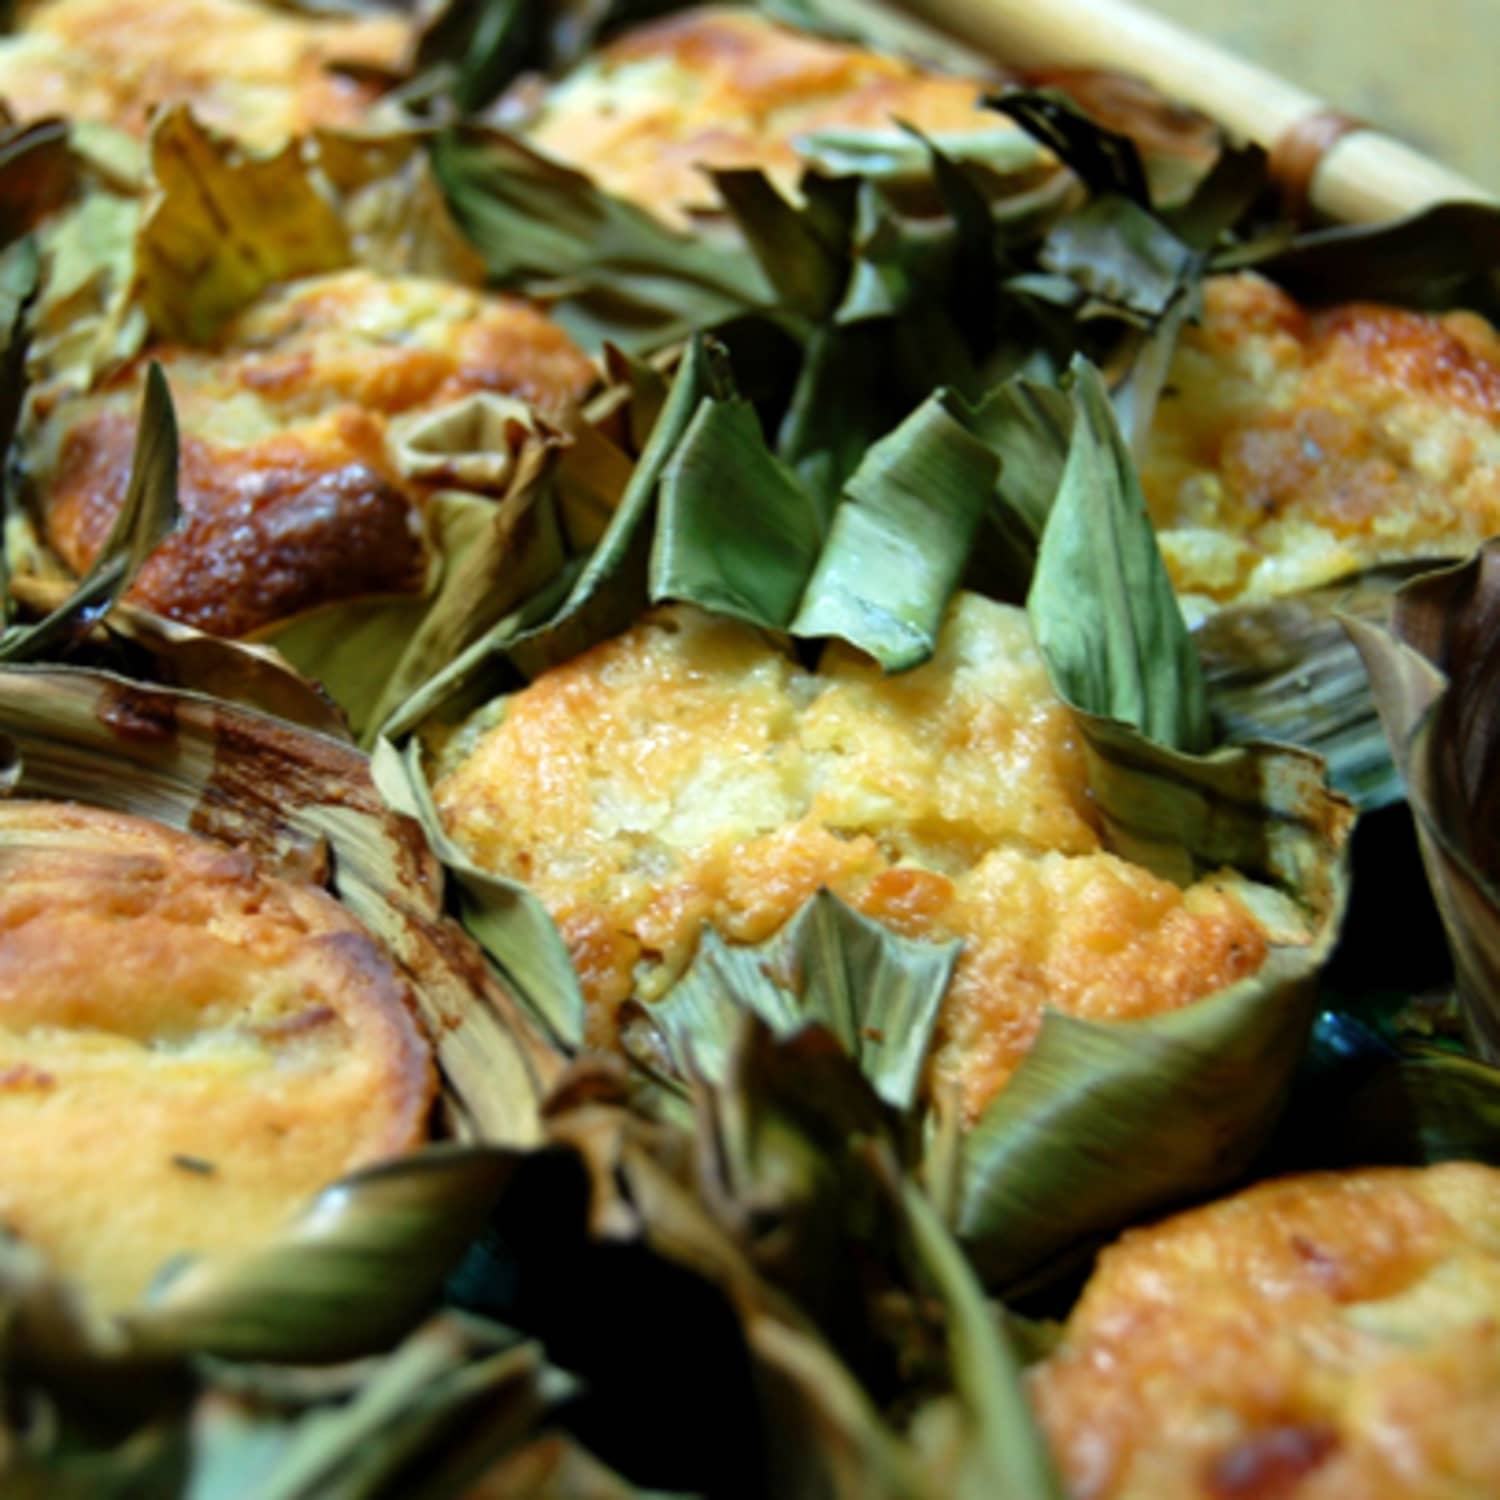 Spanish Food Wrapped In Banana Leaf - Food Recipes | Diane